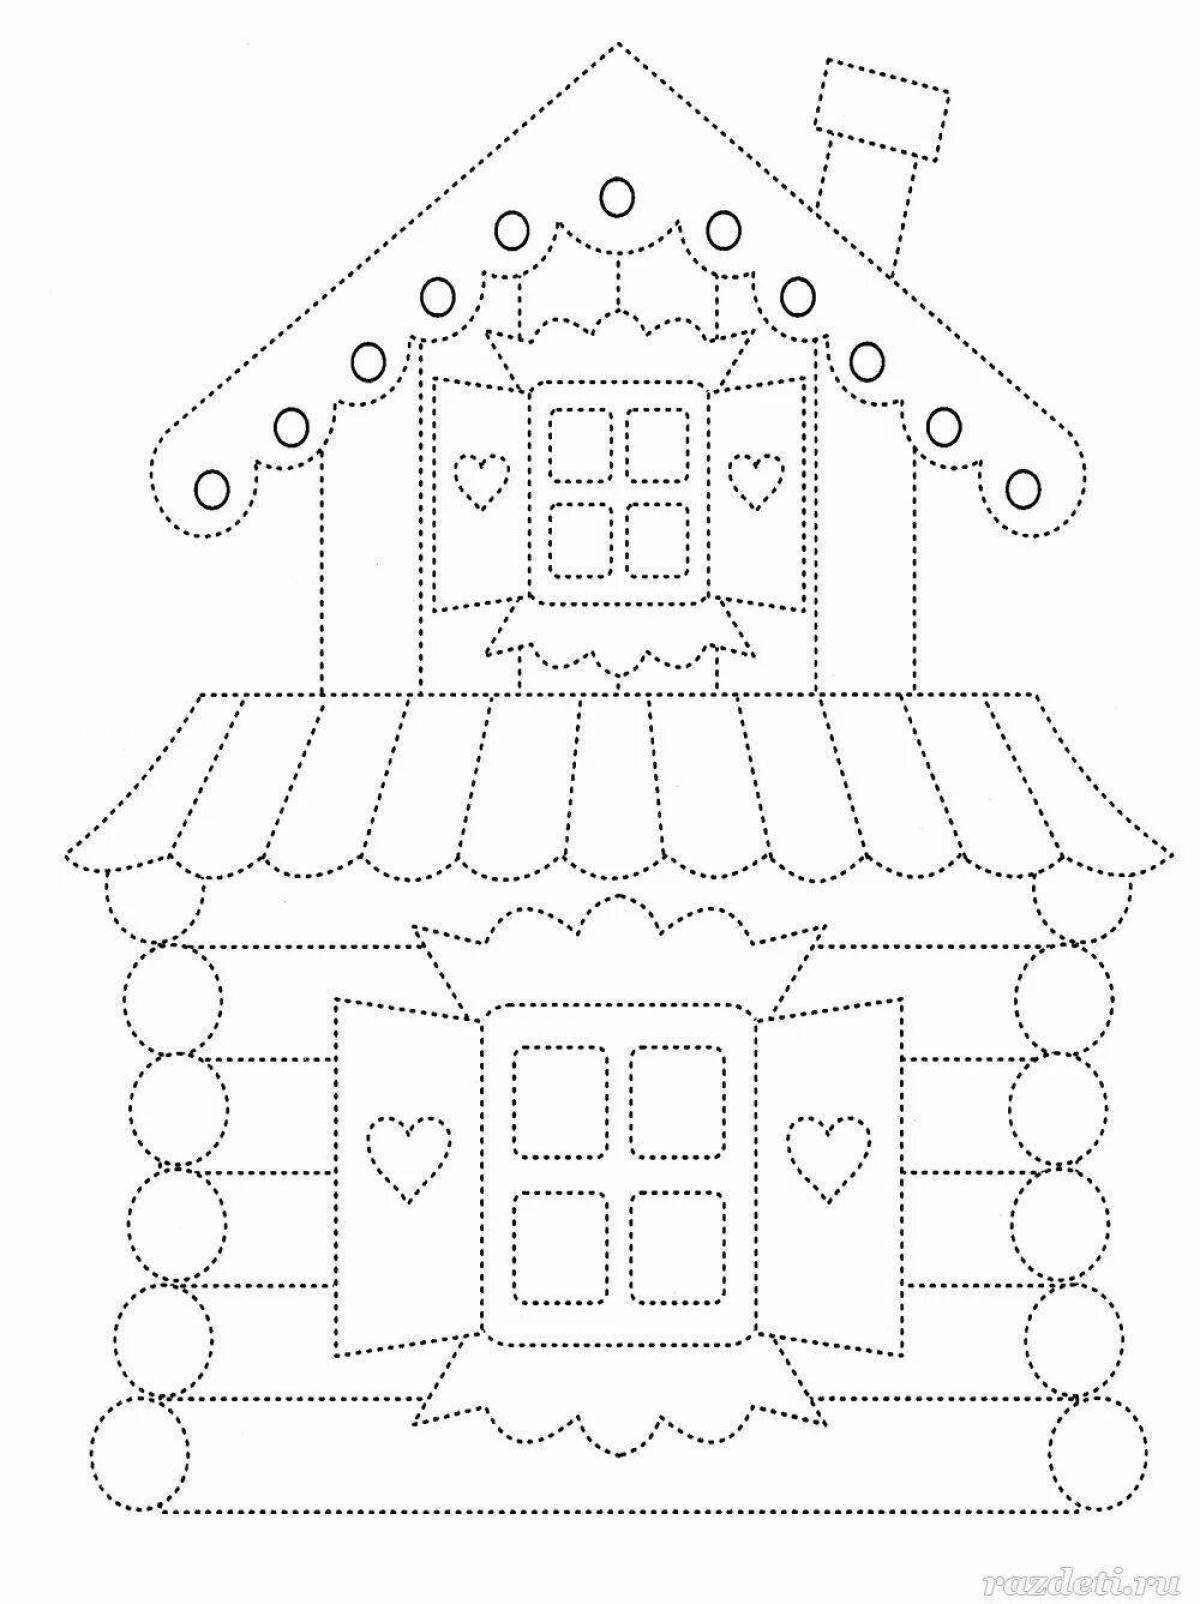 A wonderful cat house coloring for children